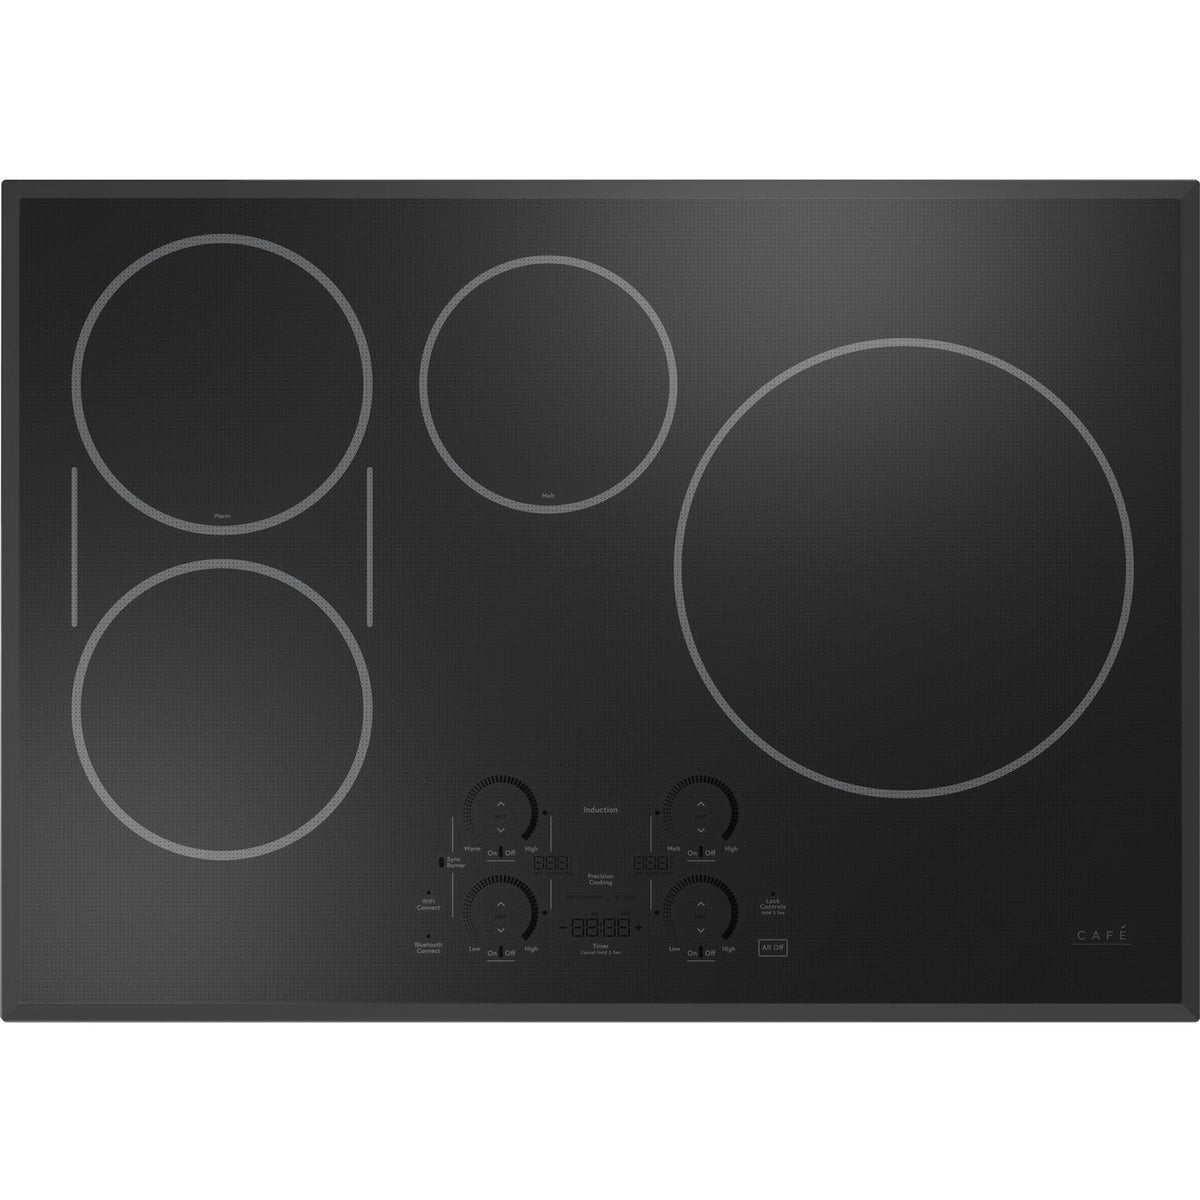 30-inch Built-in Induction Cooktop with Wi-Fi CHP90301TBB IMAGE 1